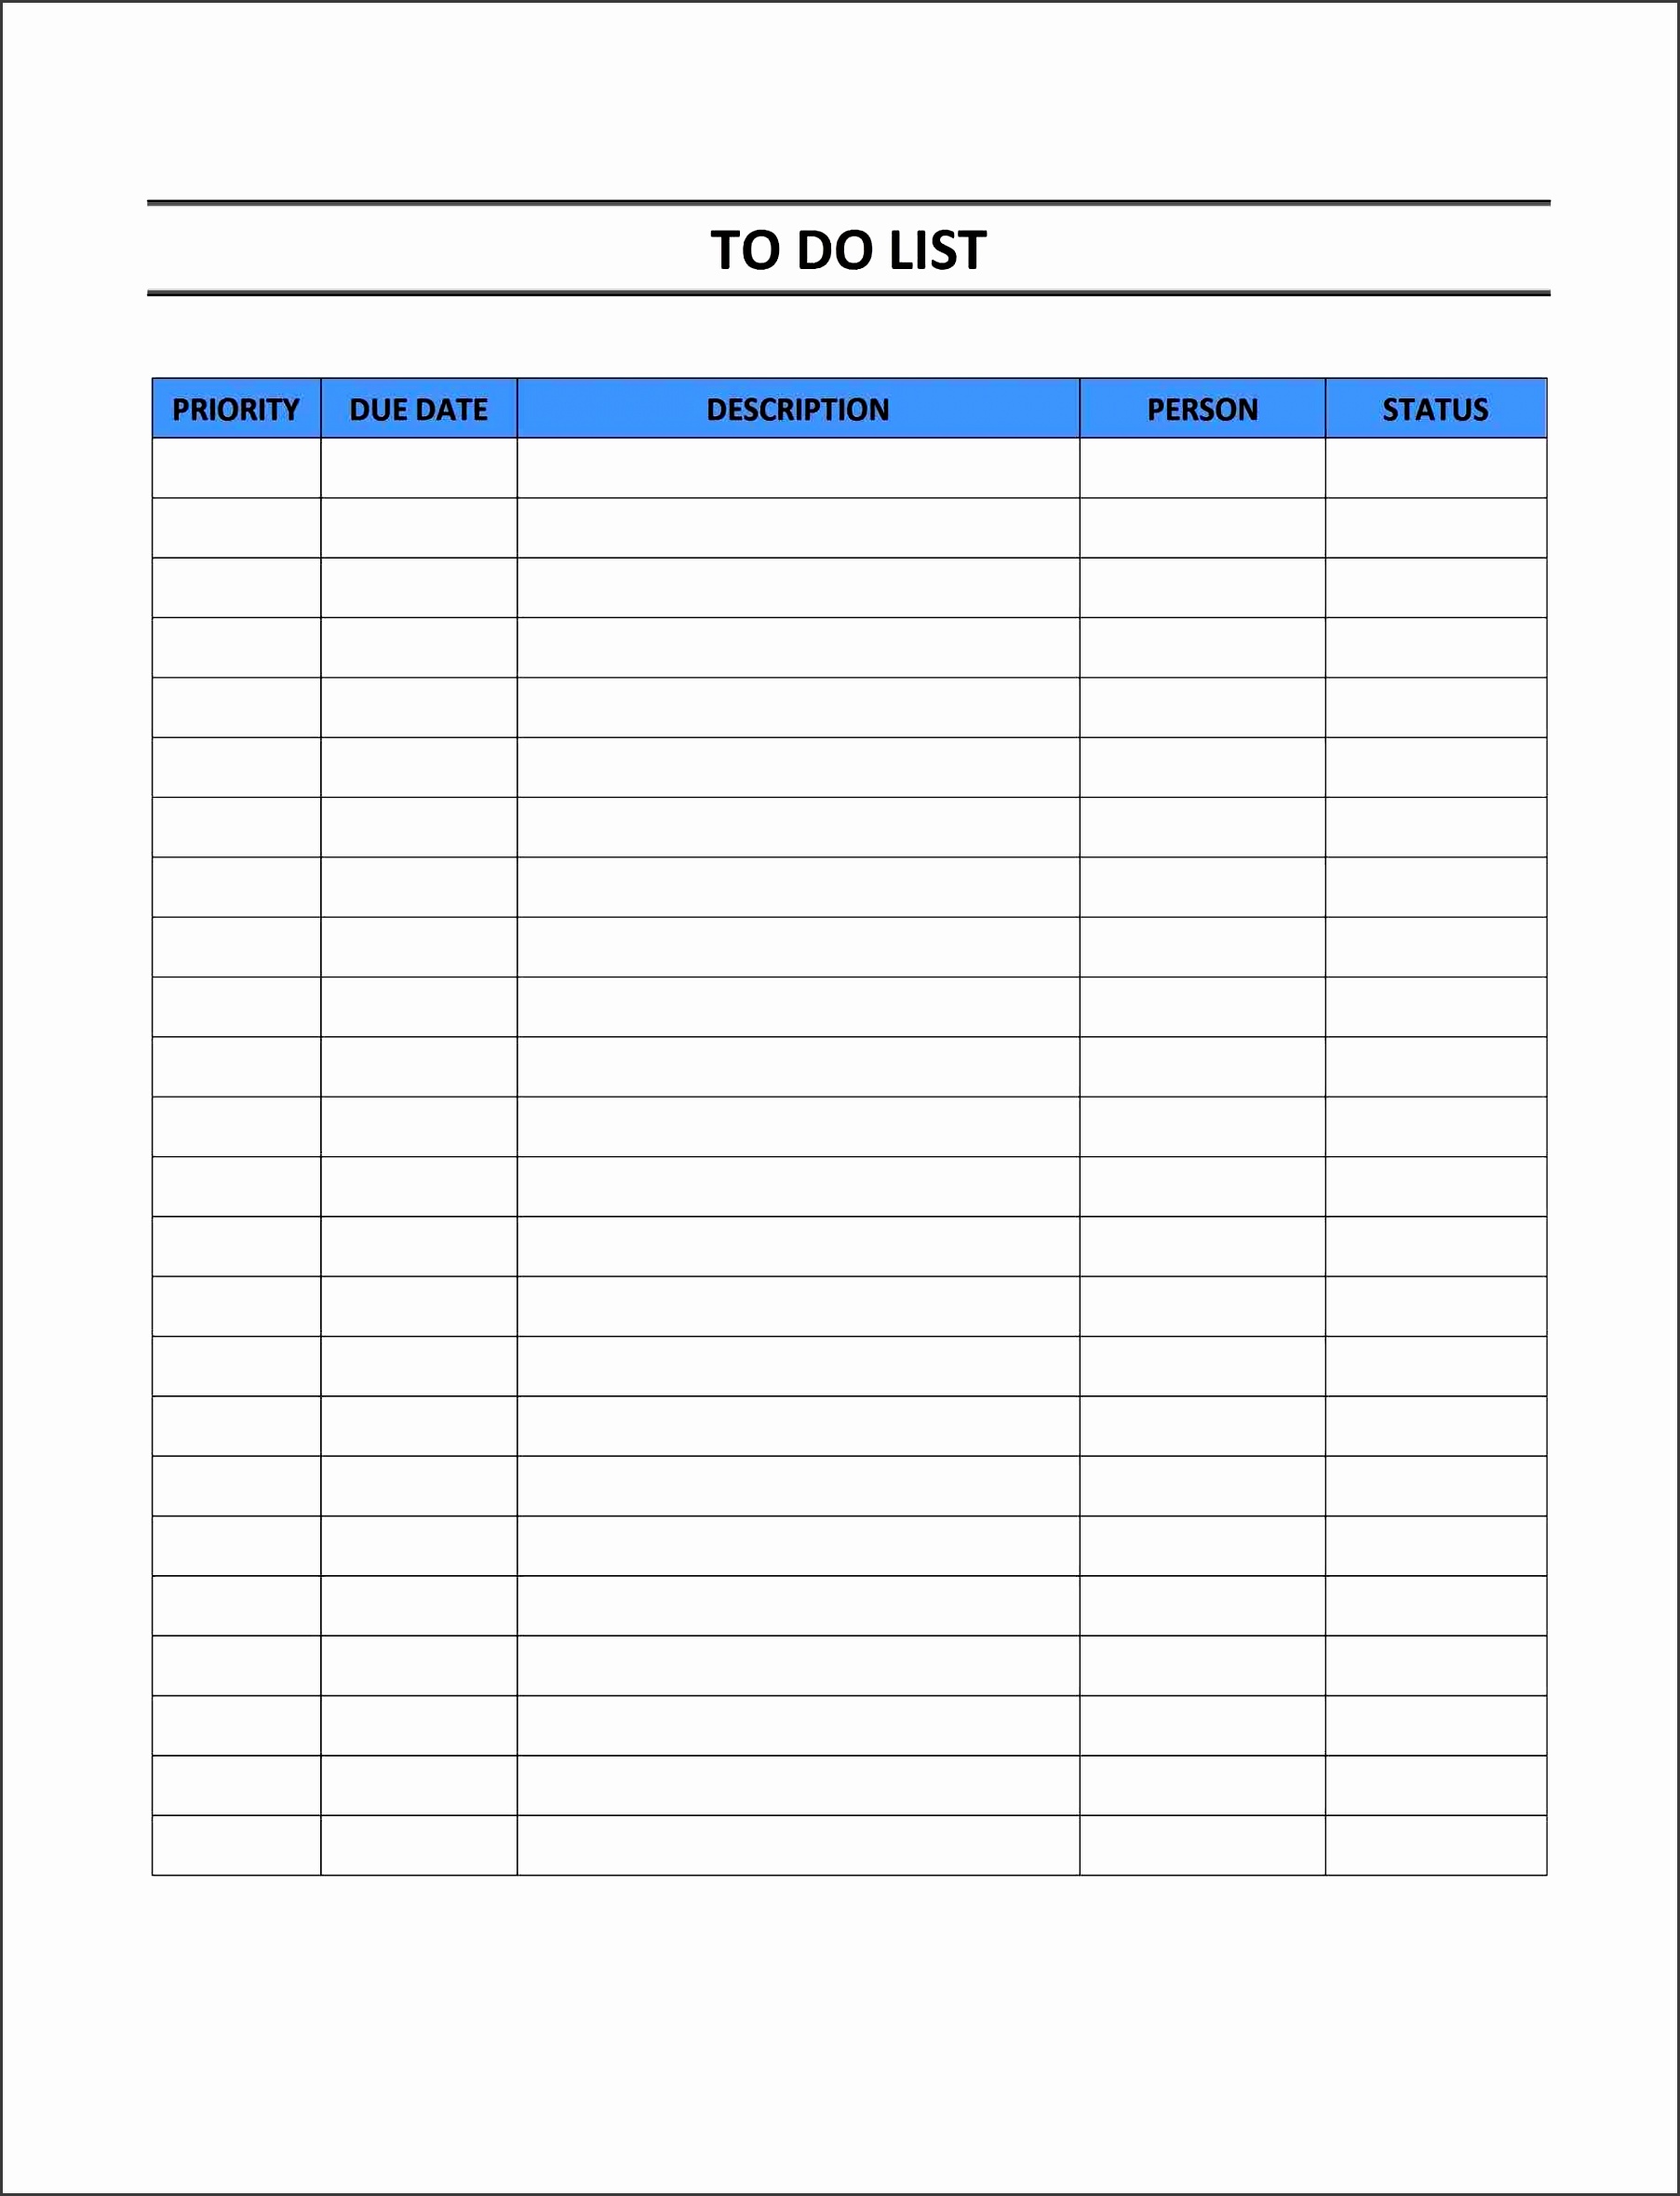 excel do list schedule template free home work checklist remodeling estimator cost estimate home daily to